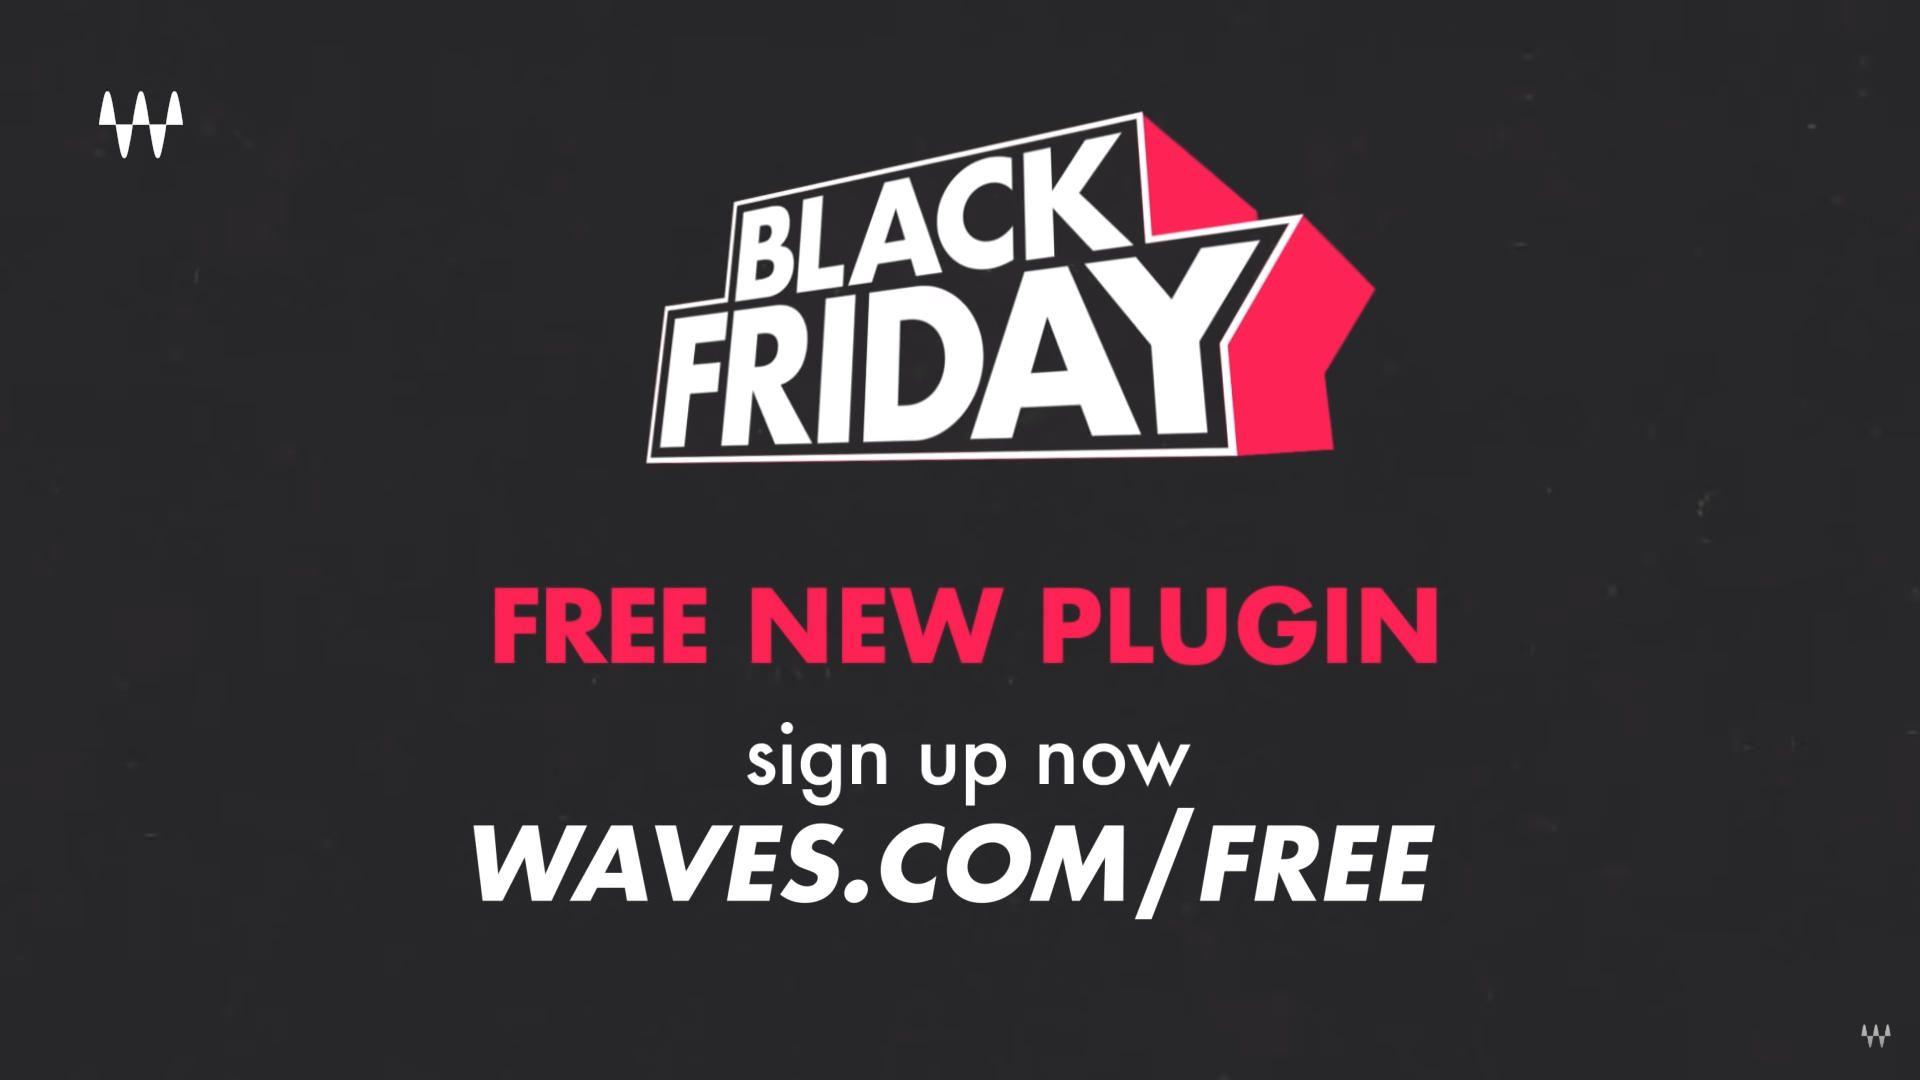 FREE Waves Plugin Coming This Black Friday Up Now!